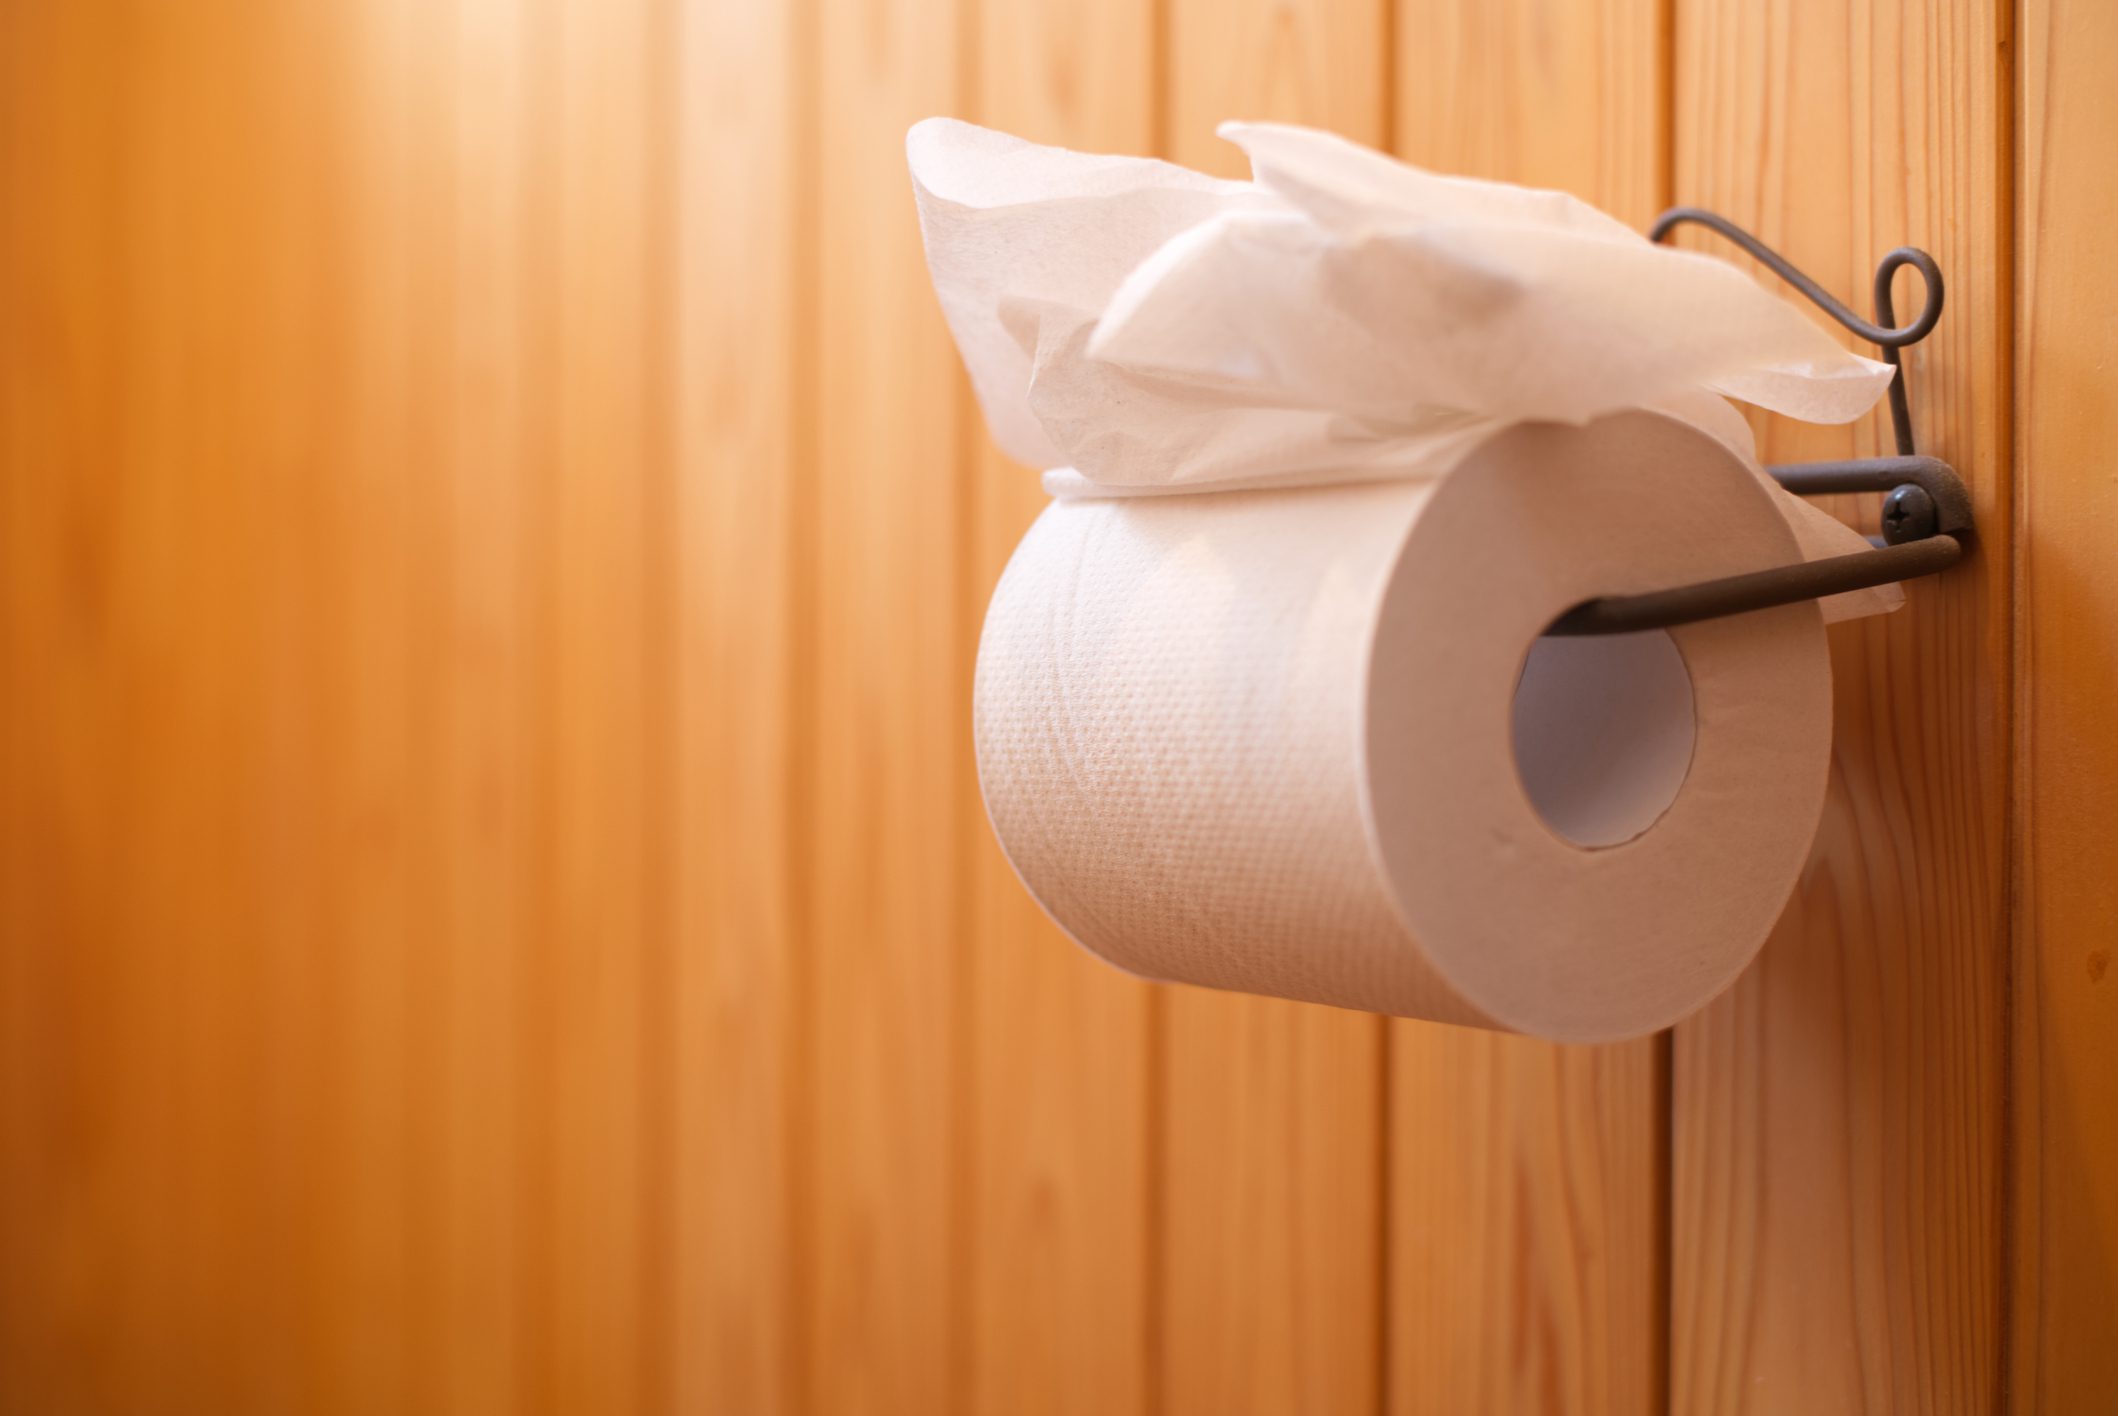 How to Change Toilet Paper Roll in Public Restroom